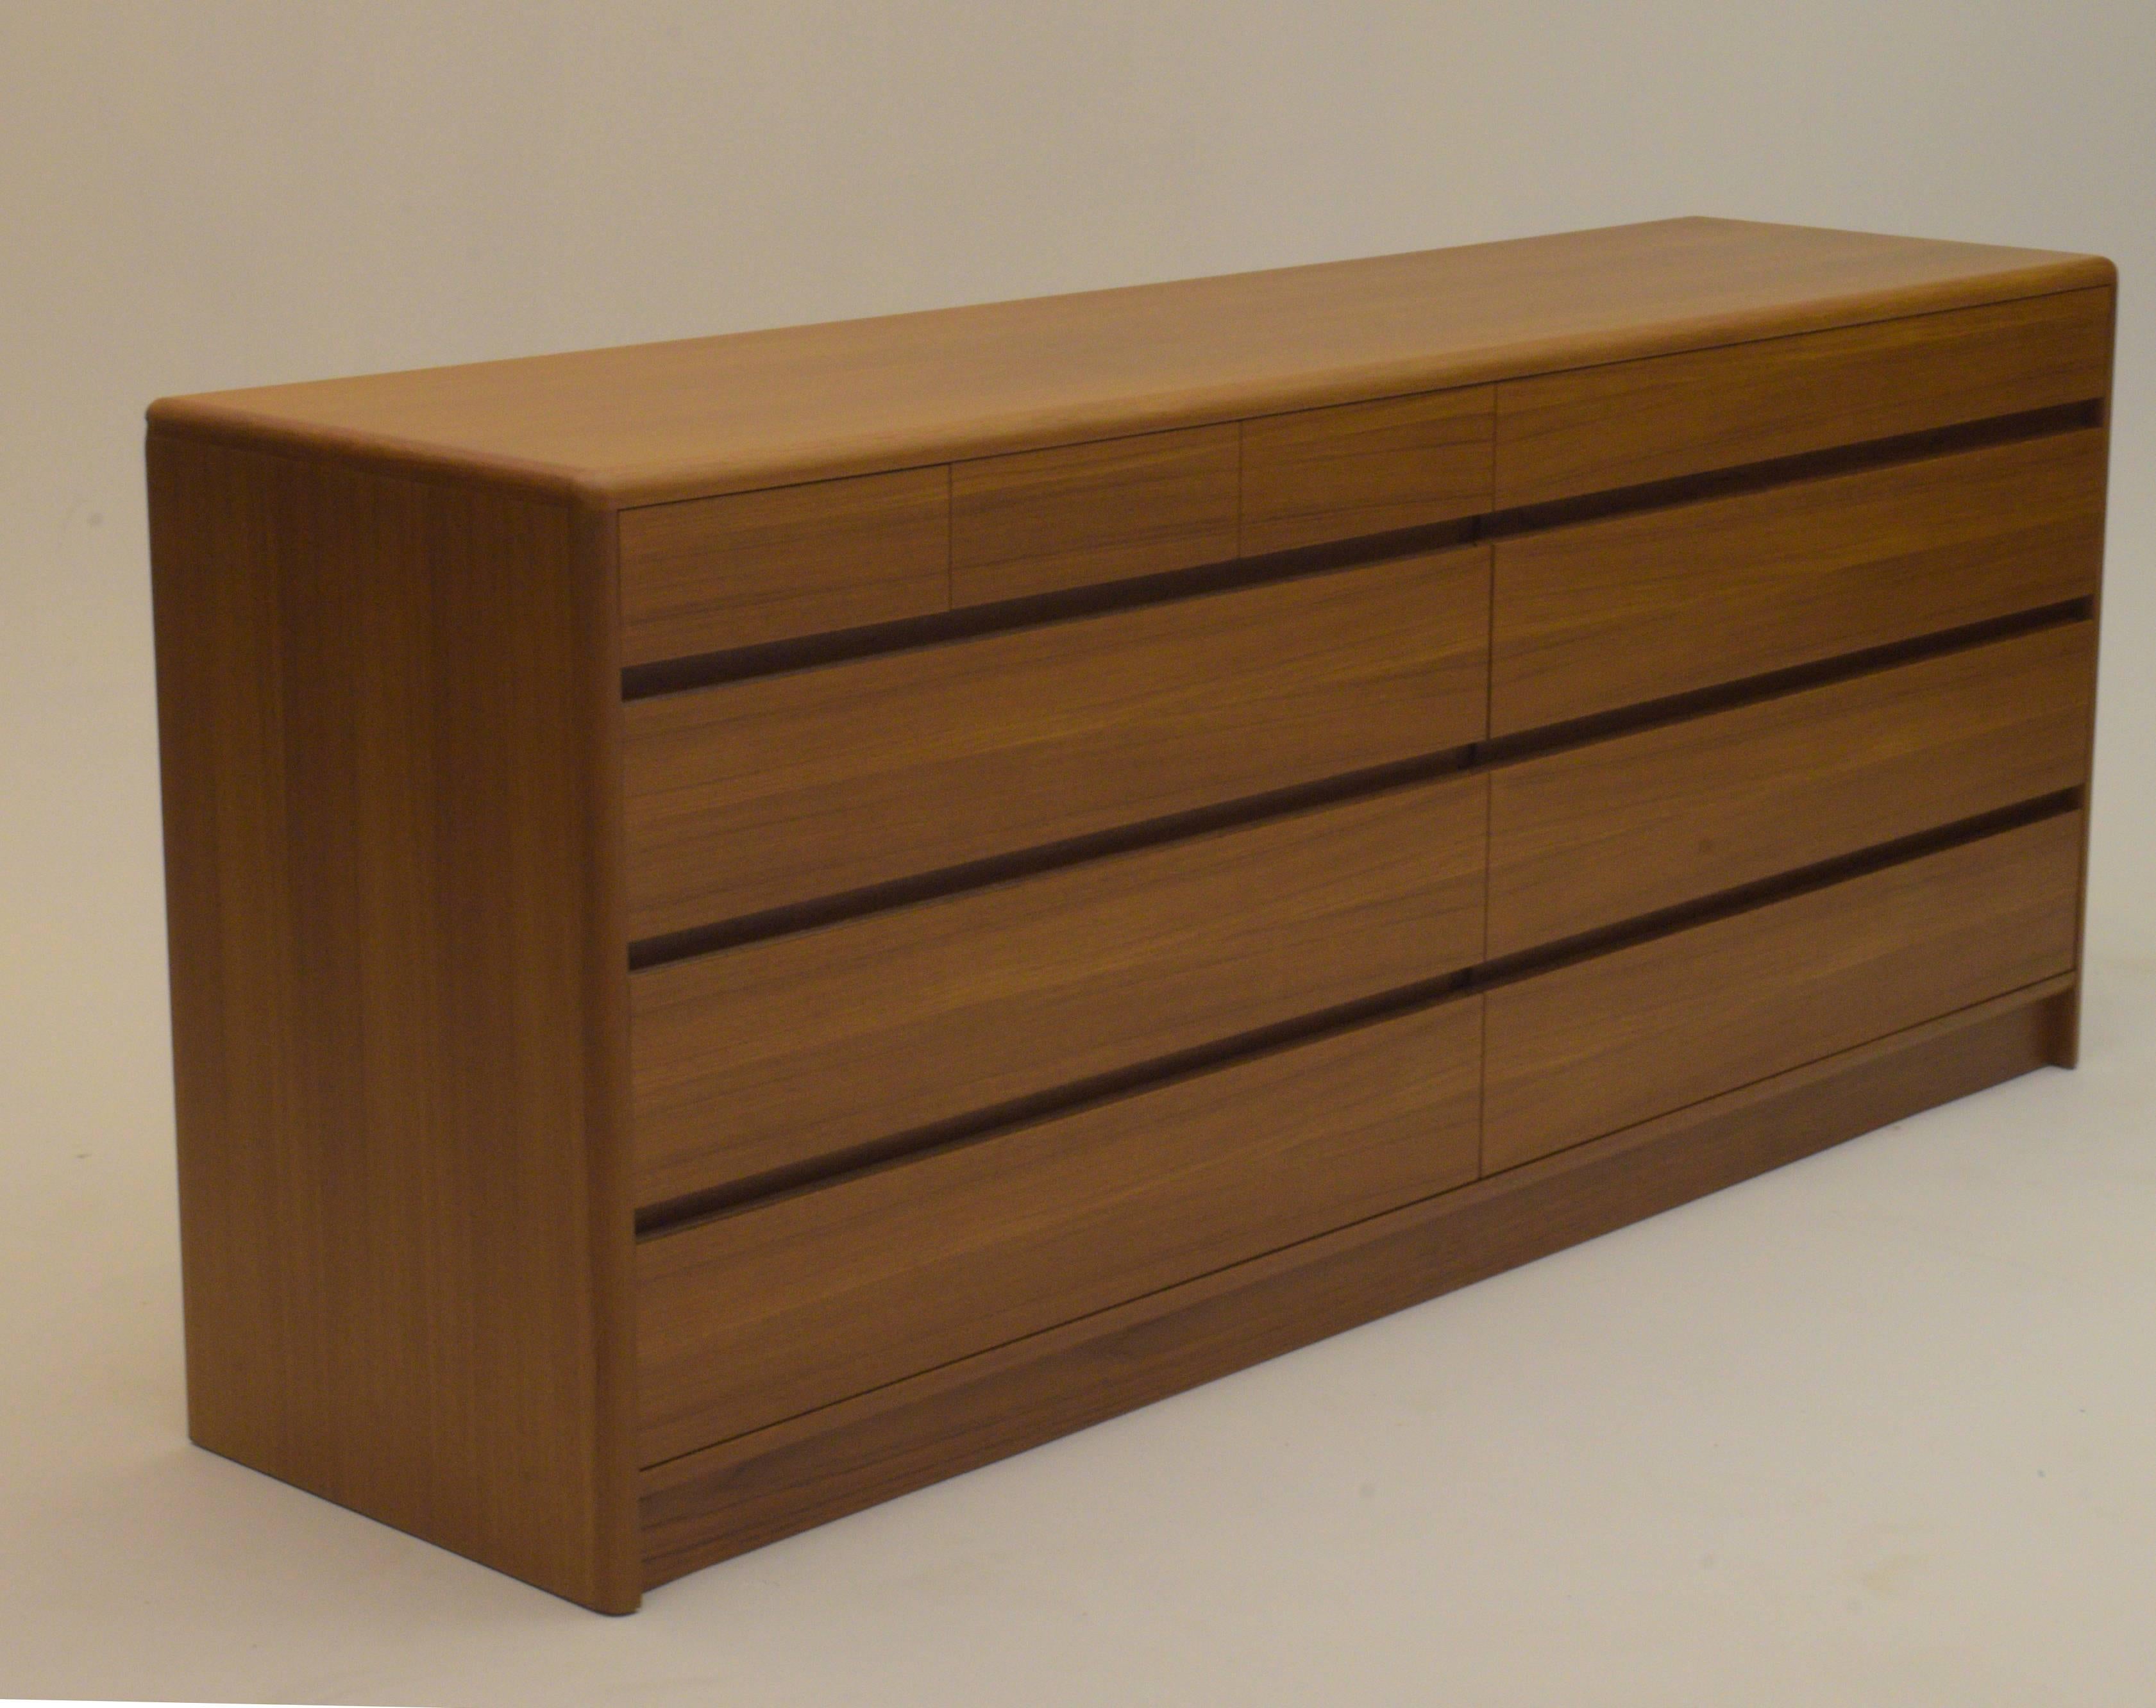 Long, low sleek Danish modern design for your bedroom or living space as a credenza. Produced in the 1960s Copenhagen, Denmark. Stunning quality with book matched teak and exceptionally well built.

Matching tall boy chest (armoire) available in